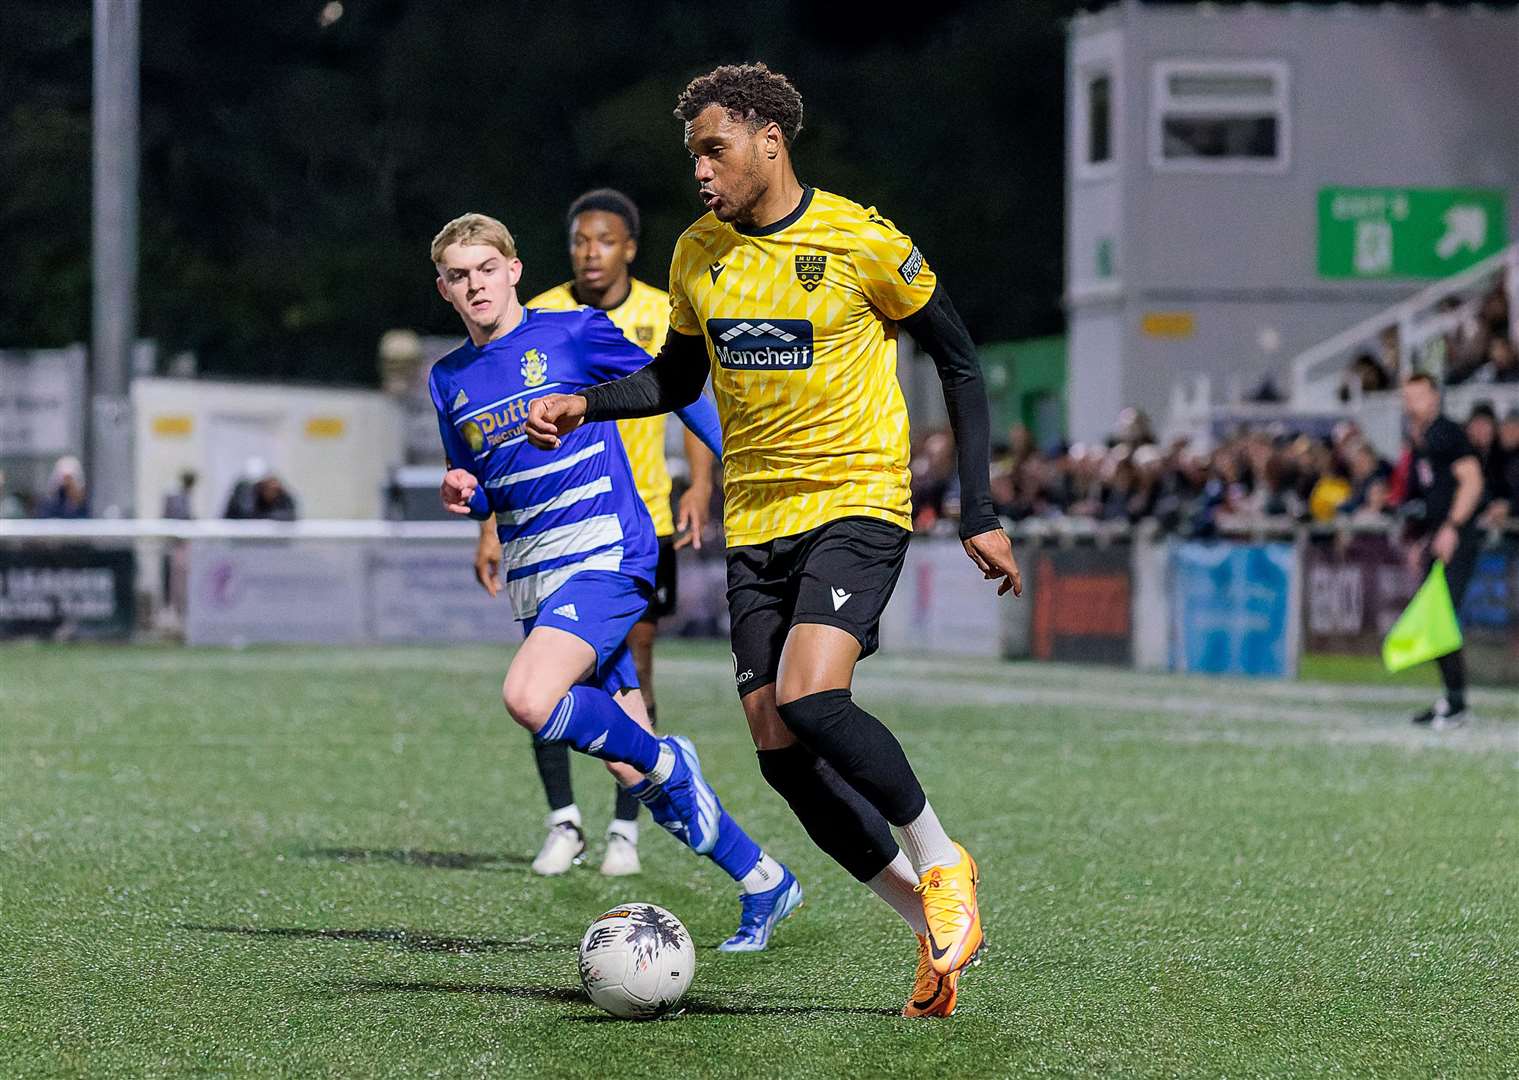 Maidstone midfielder Michael Klass could line up against his old club. Picture: Helen Cooper